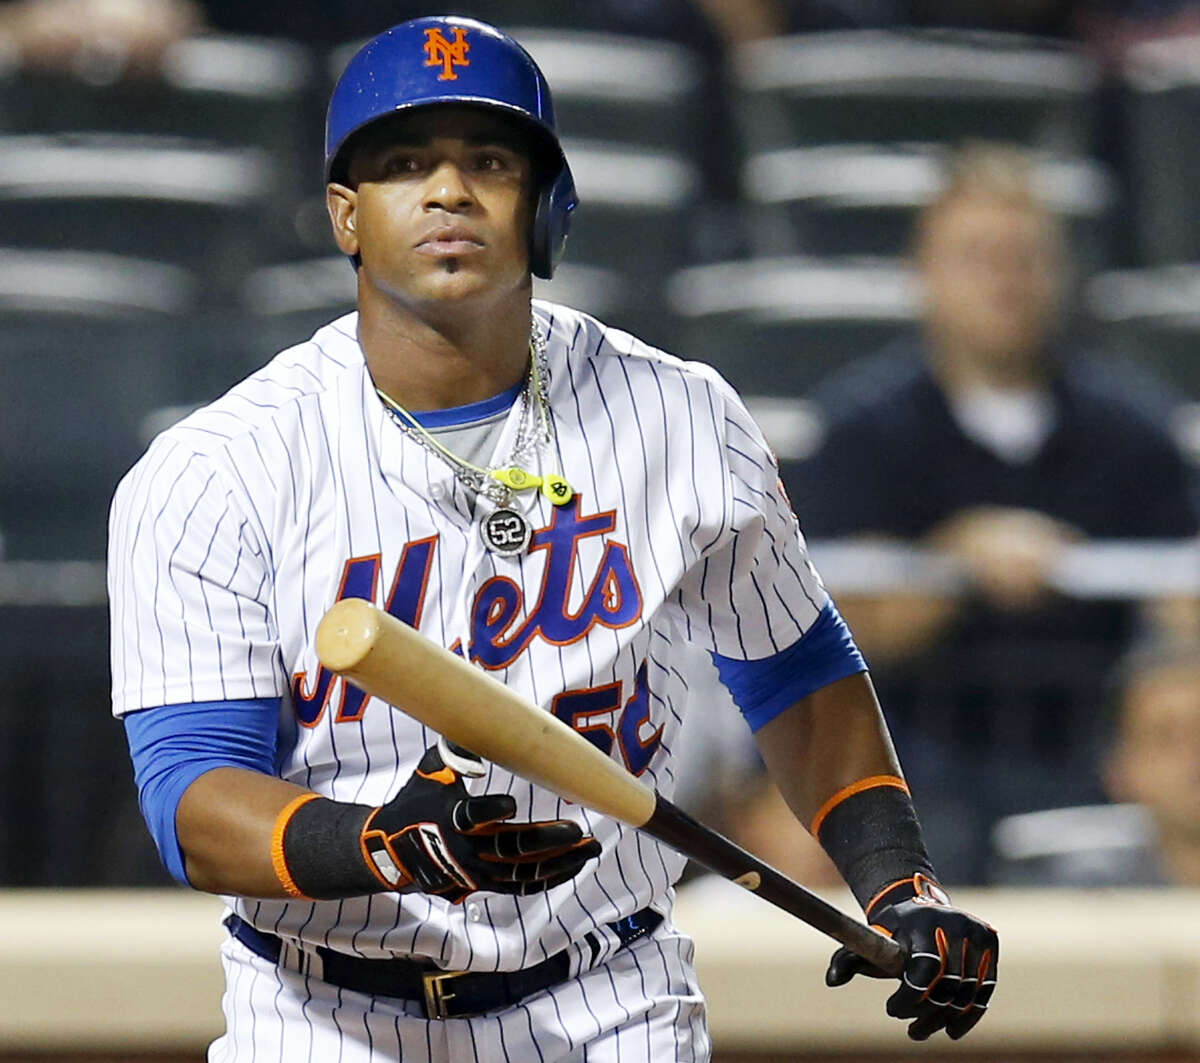 Yoenis Cespedes has opted out of the remaining two years of his contract with the Mets.